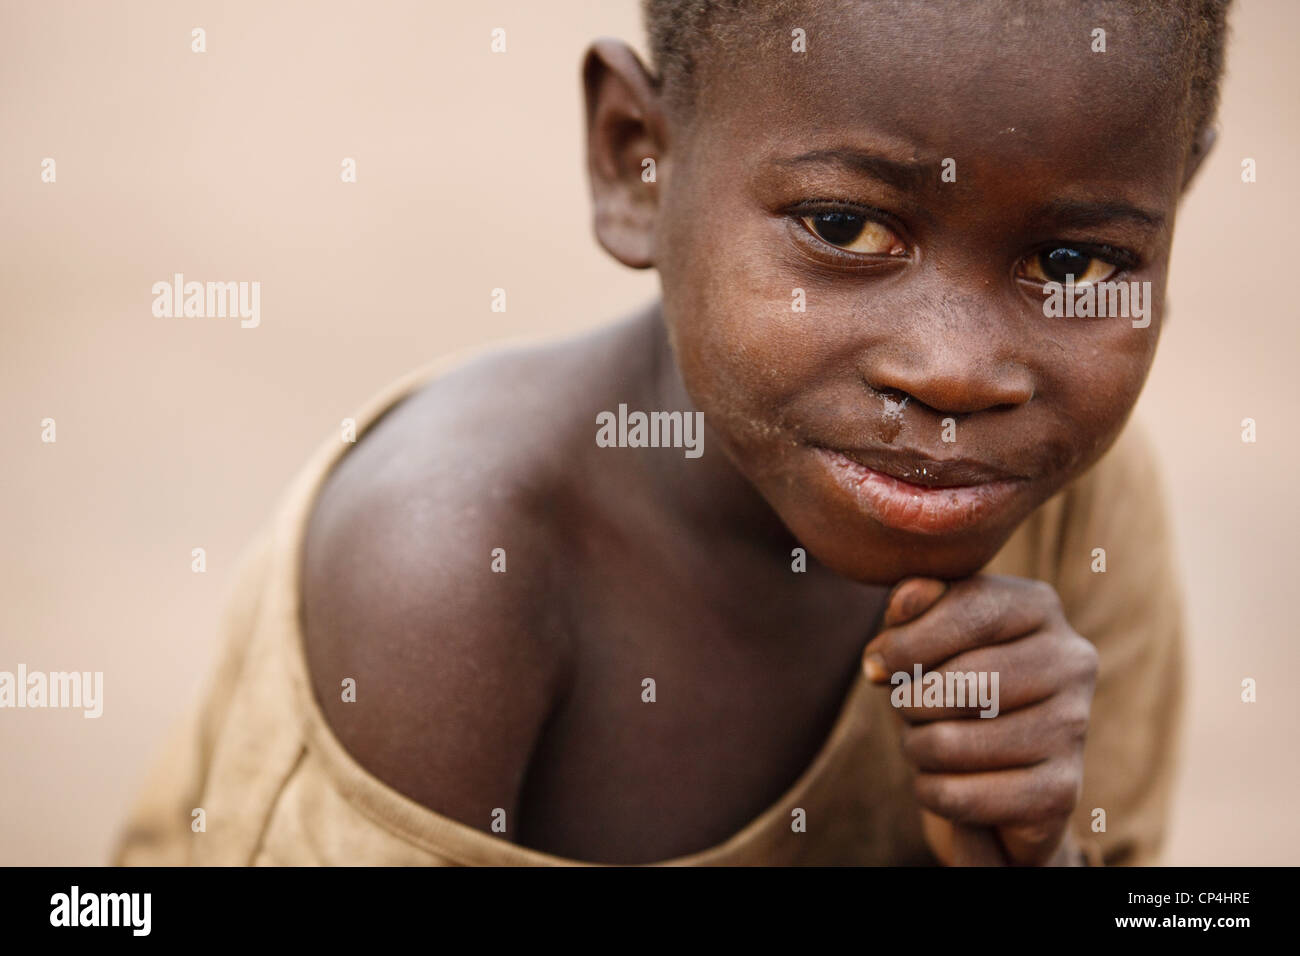 Portrait of a young boy at the Miketo IDP camp, Katanga province, Democratic Republic of Congo on Sunday February 19, 2012. Stock Photo